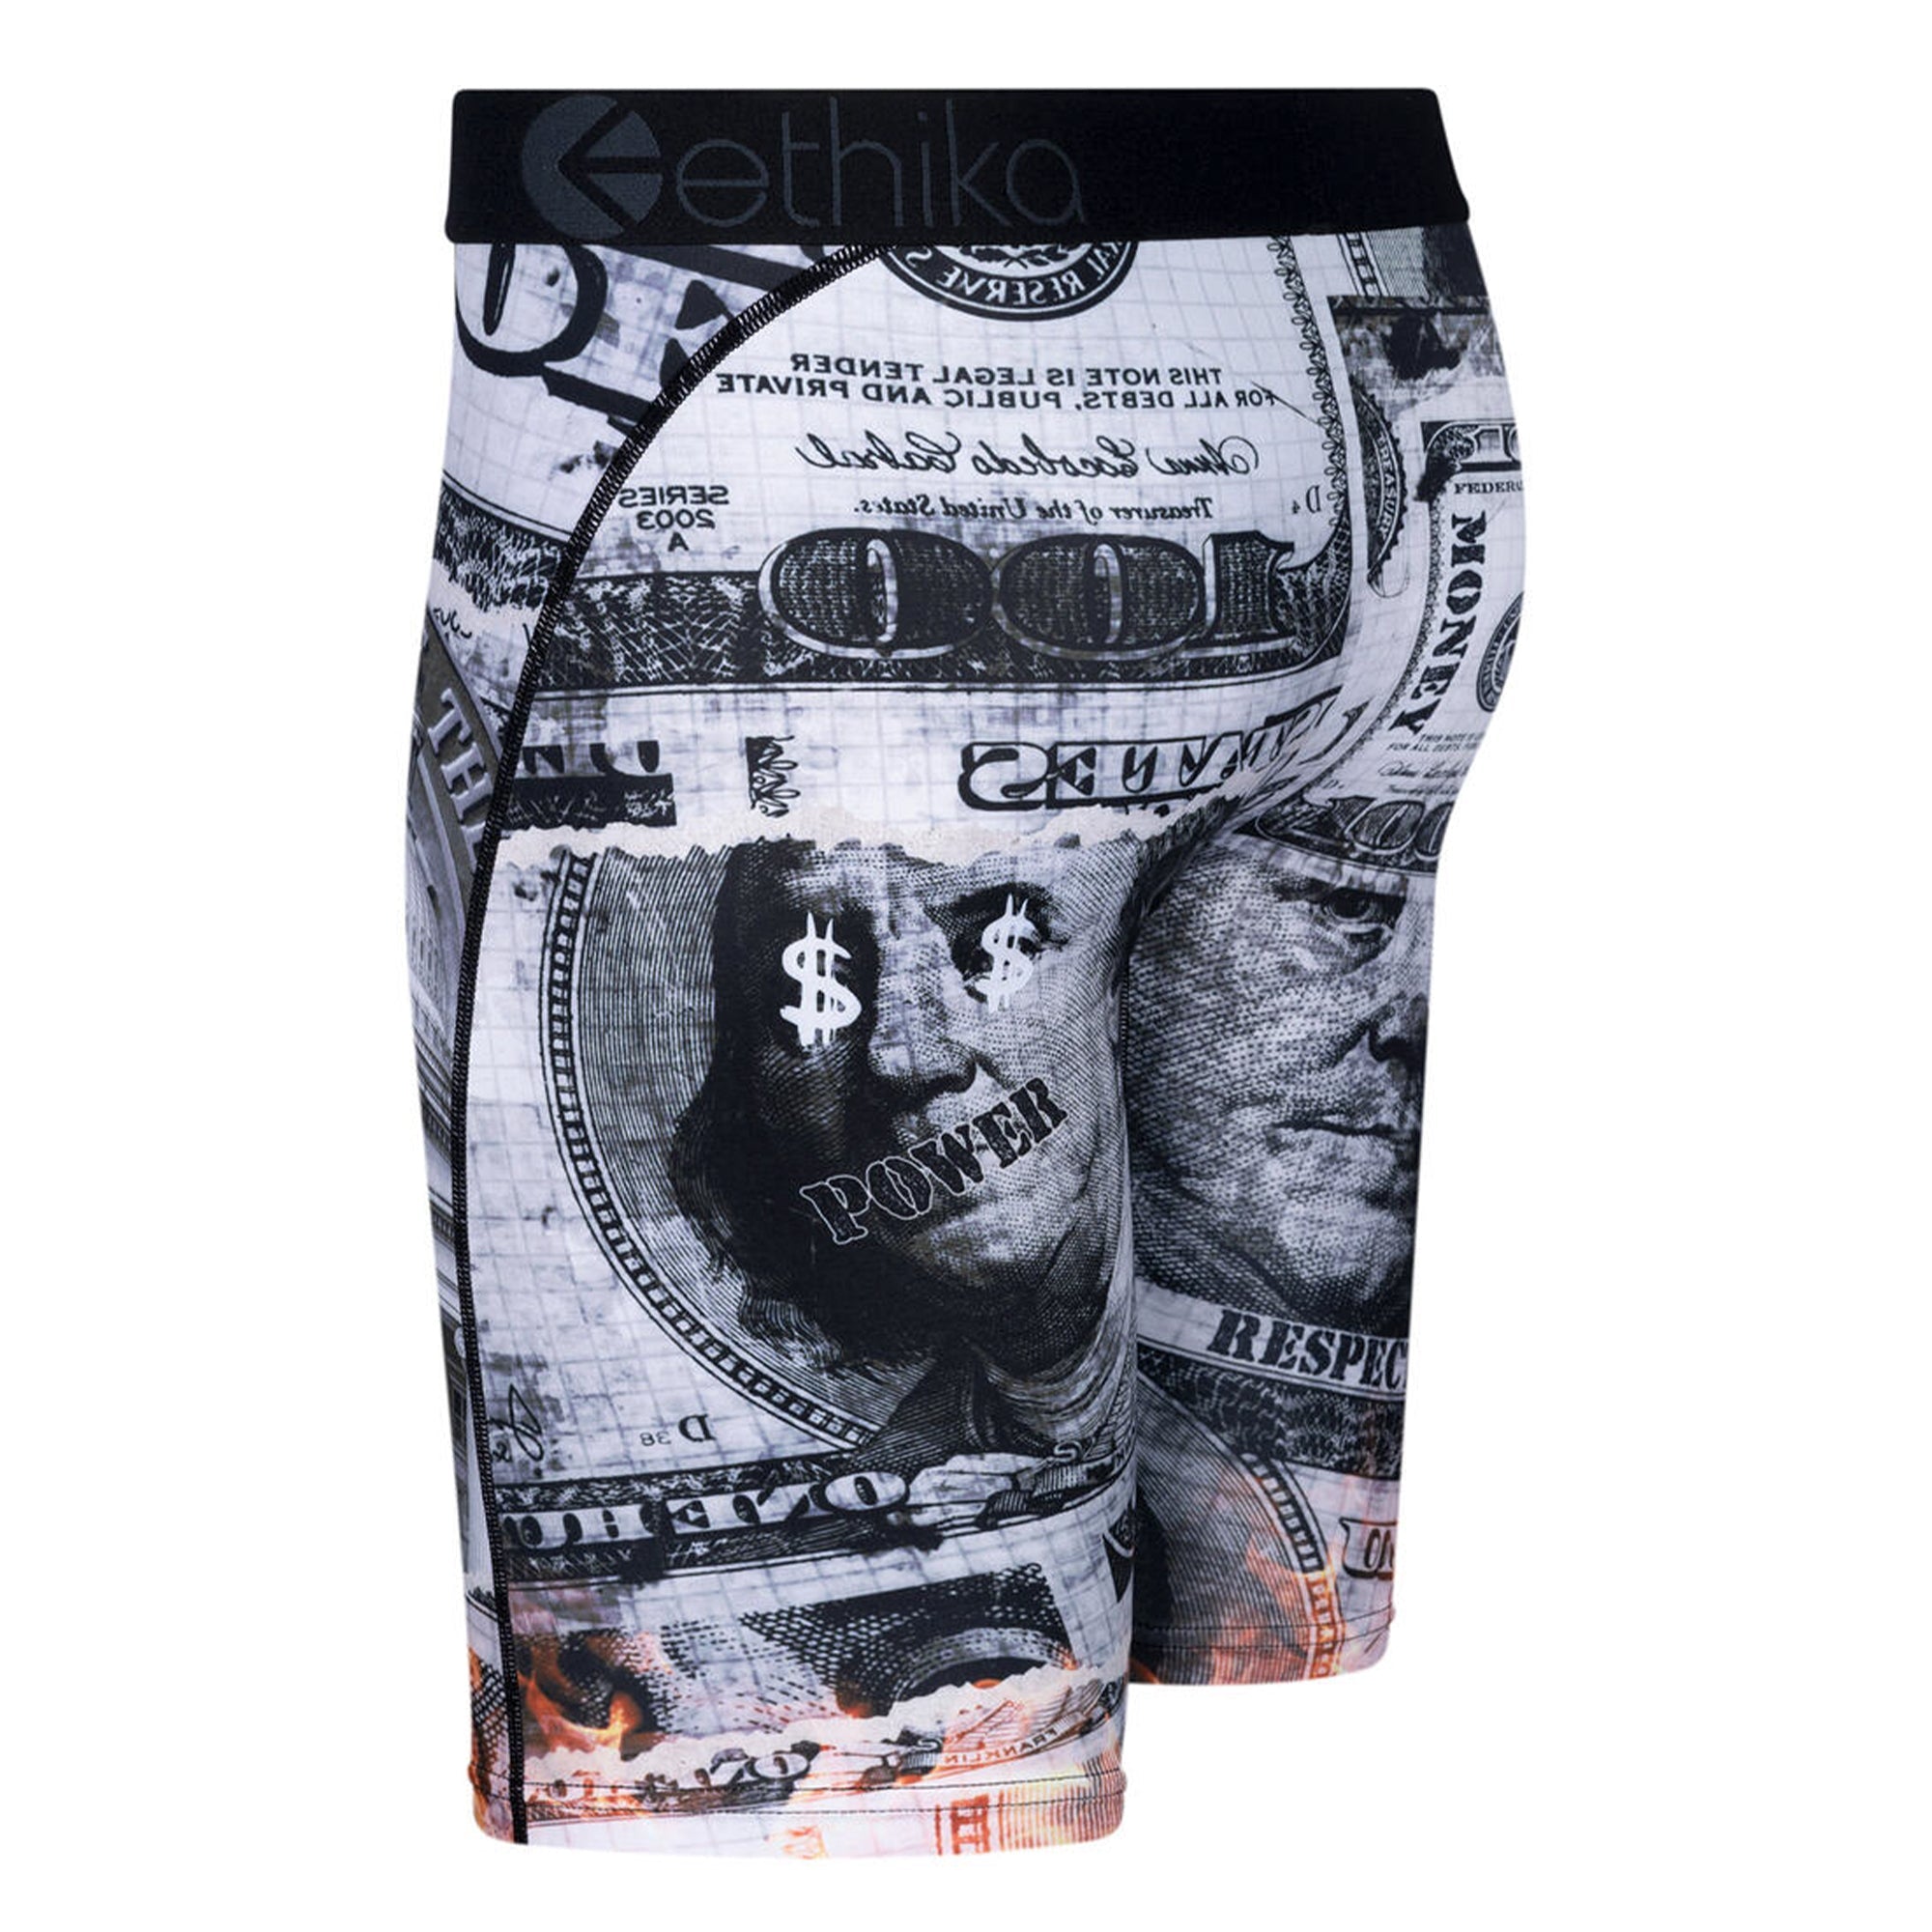 Ethika: Free shipping on all SALE orders!